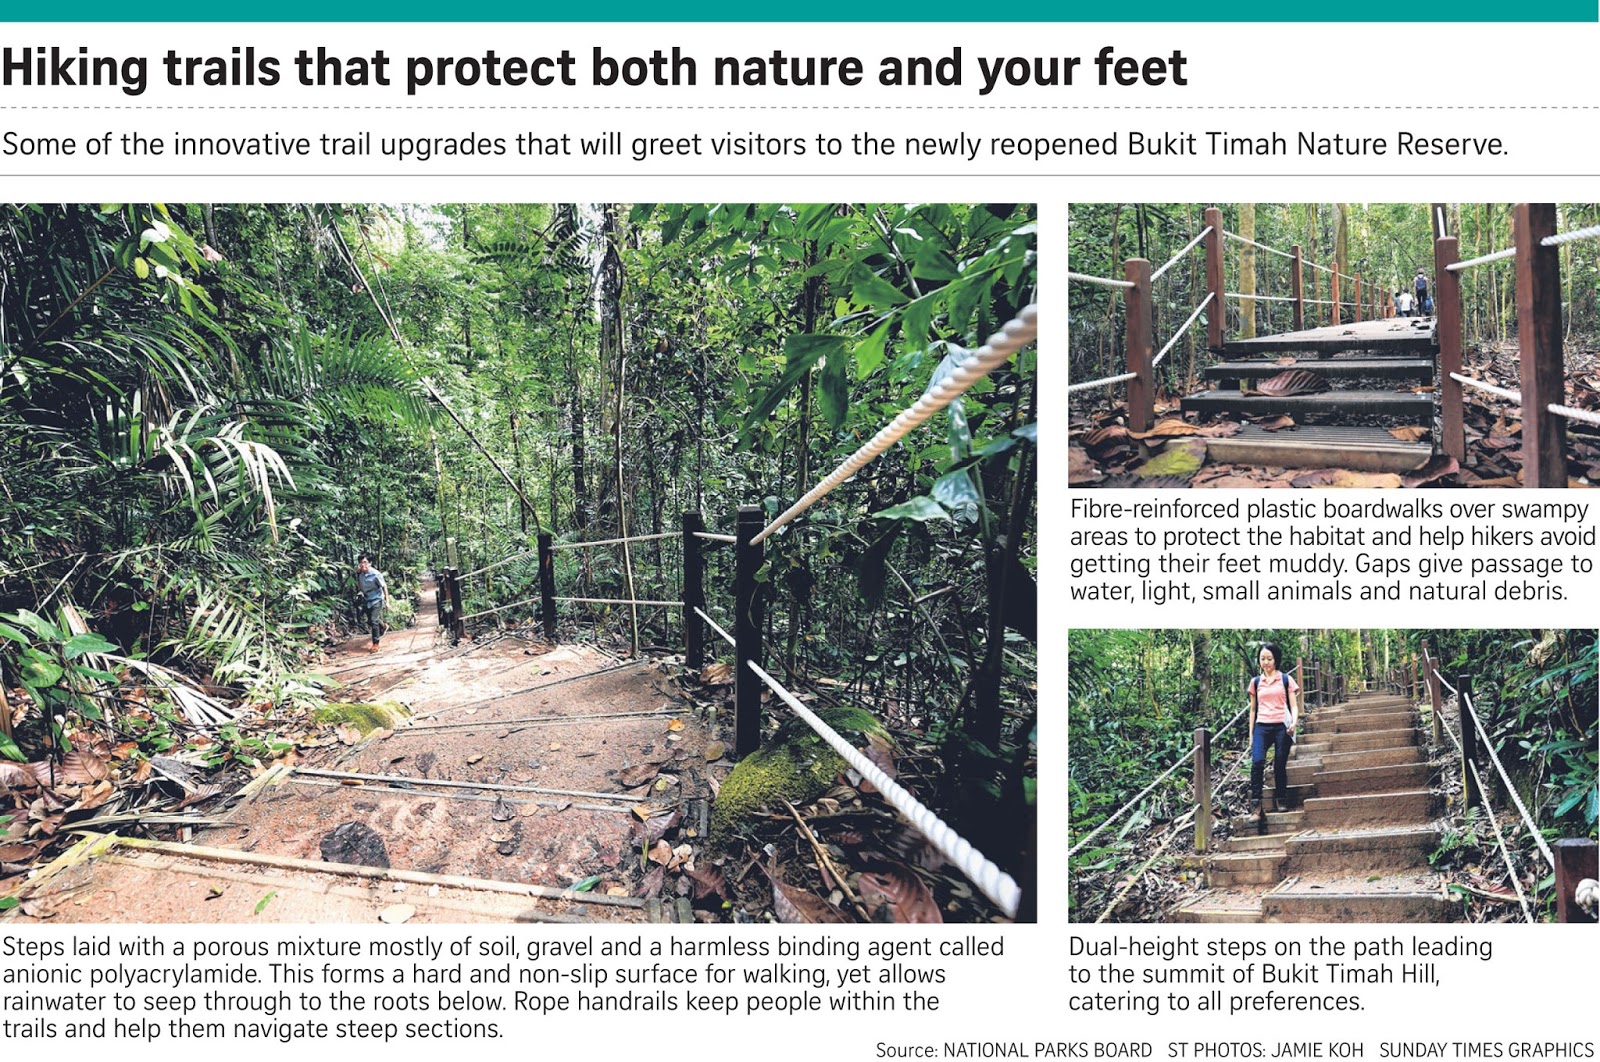 If Only Singaporeans Stopped to Think: Bukit Timah Nature Reserve to shut  for repairs; Reopens after $14m revamp in October 2016